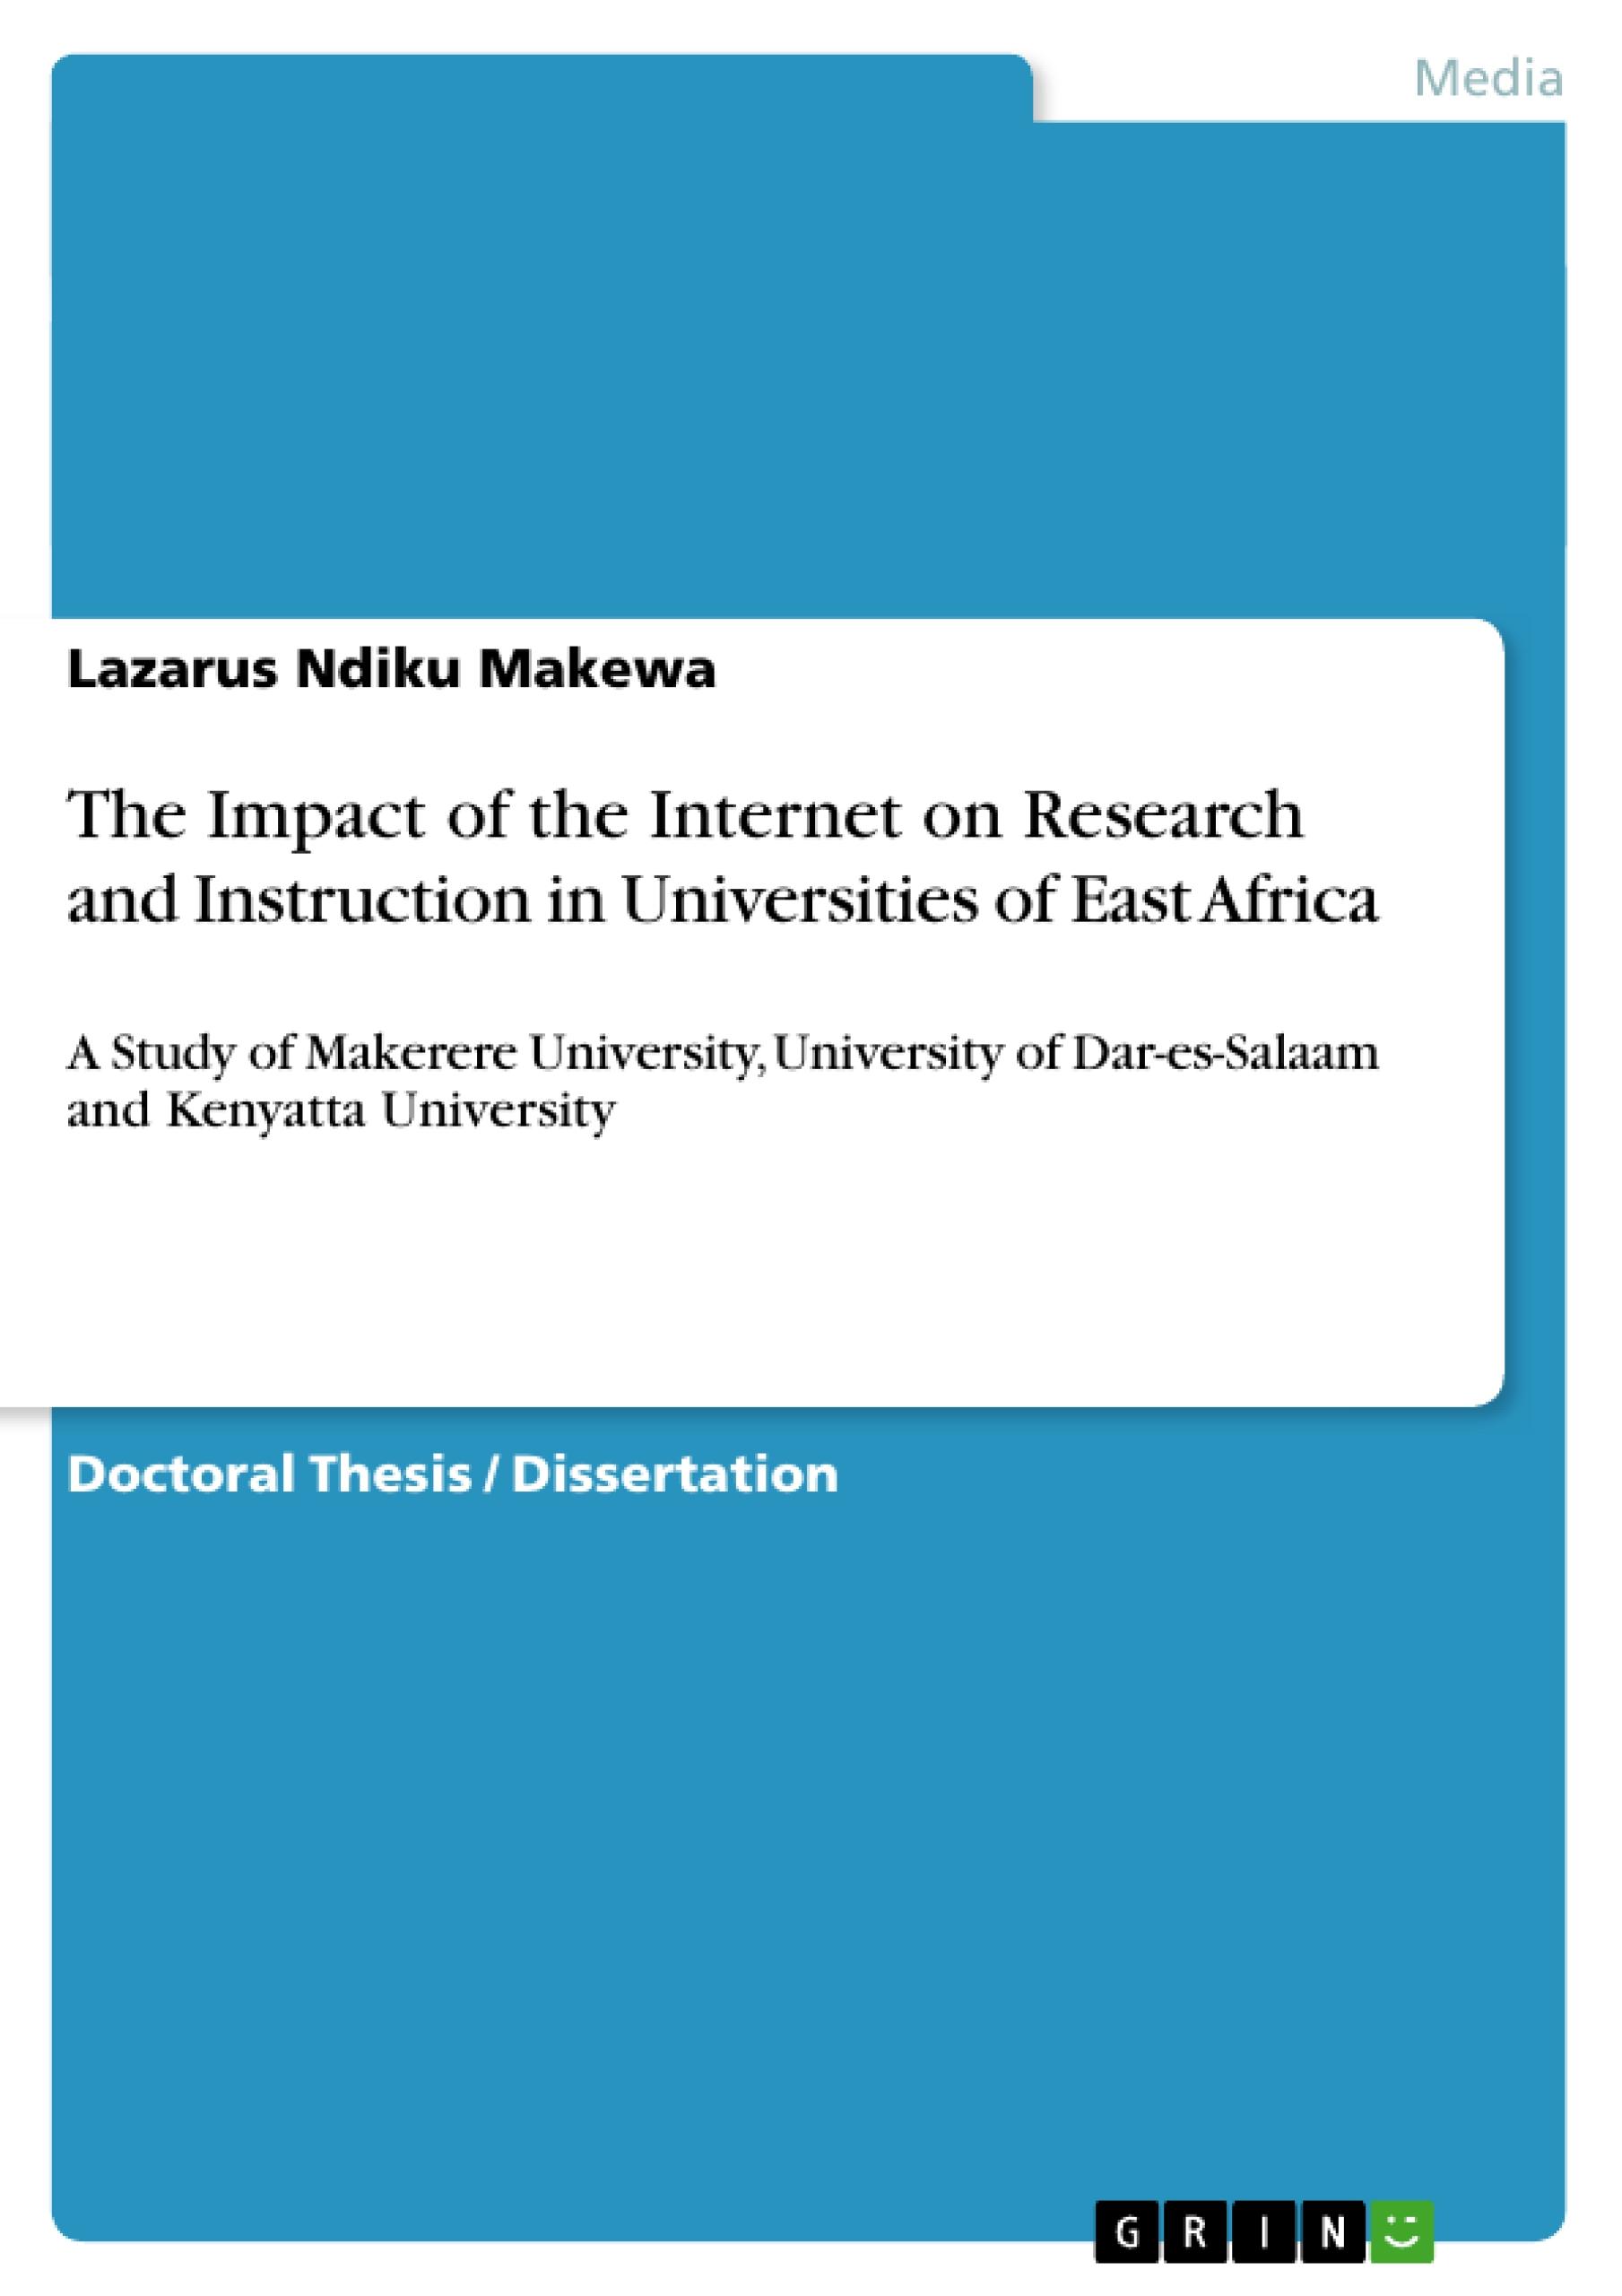 The Impact of the Internet on Research and Instruction in Universities of East Africa - Ndiku Makewa, Lazarus